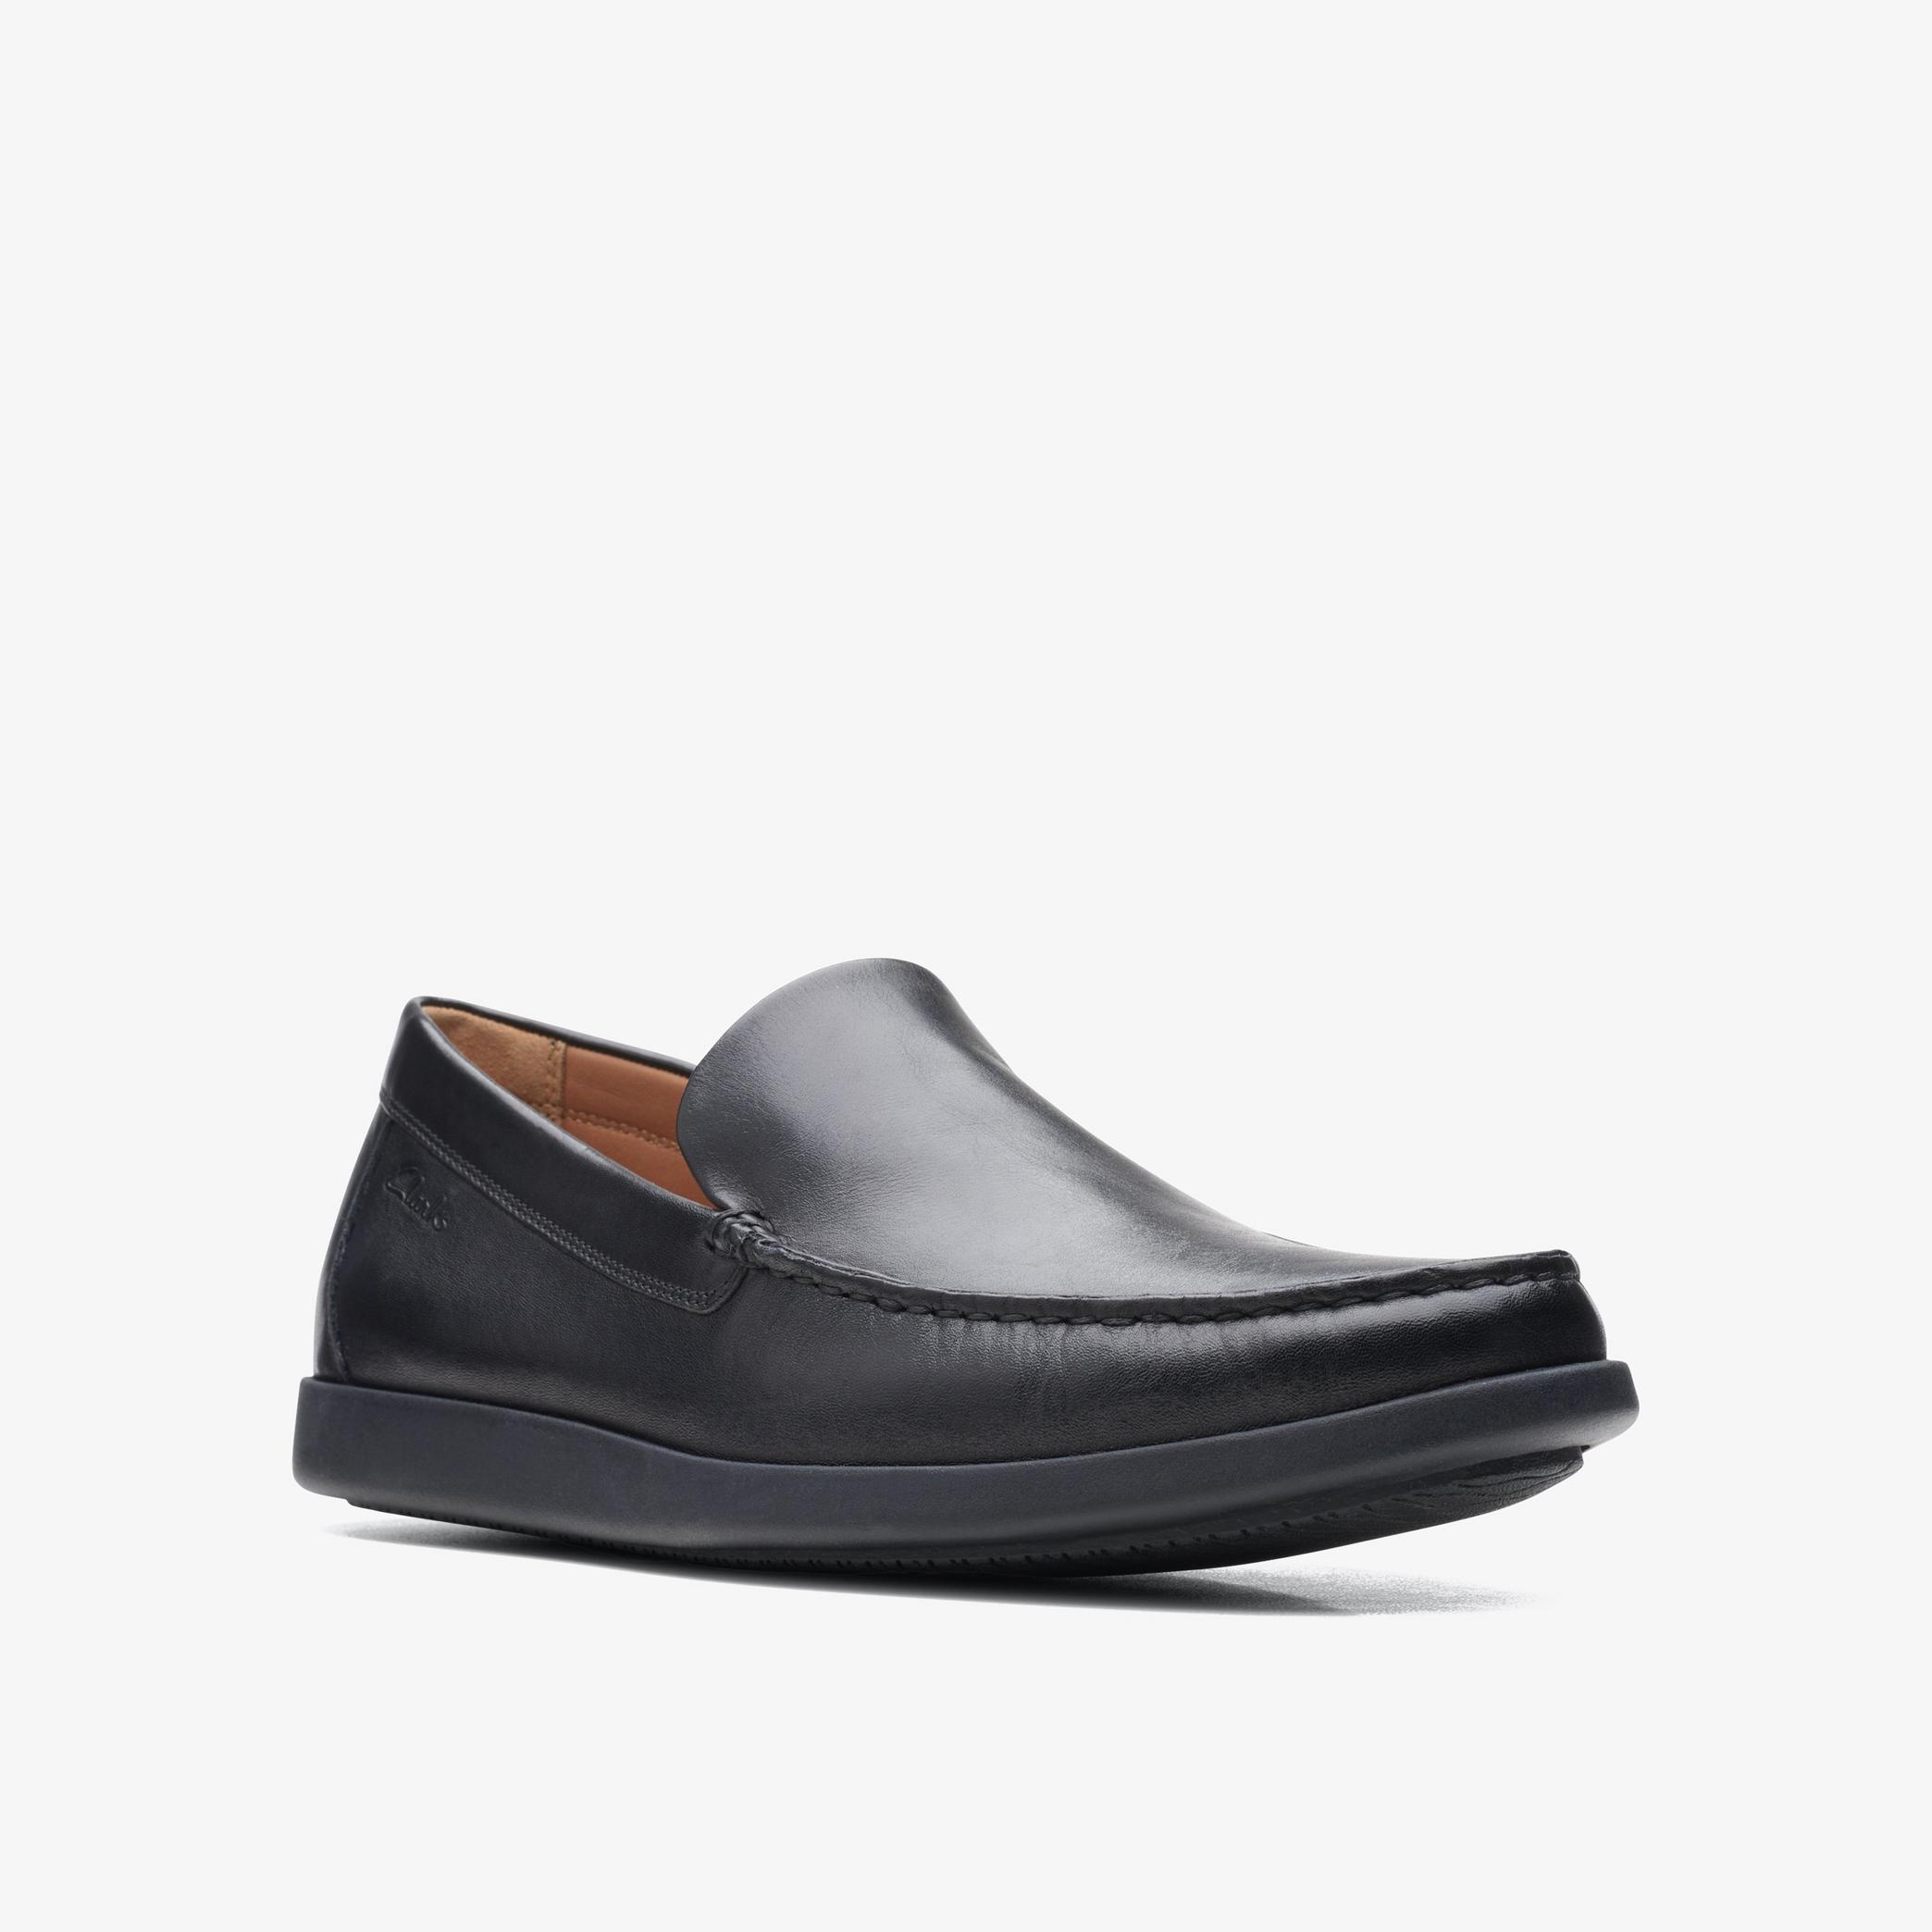 Ferius Creek Black Leather Loafers, view 3 of 6